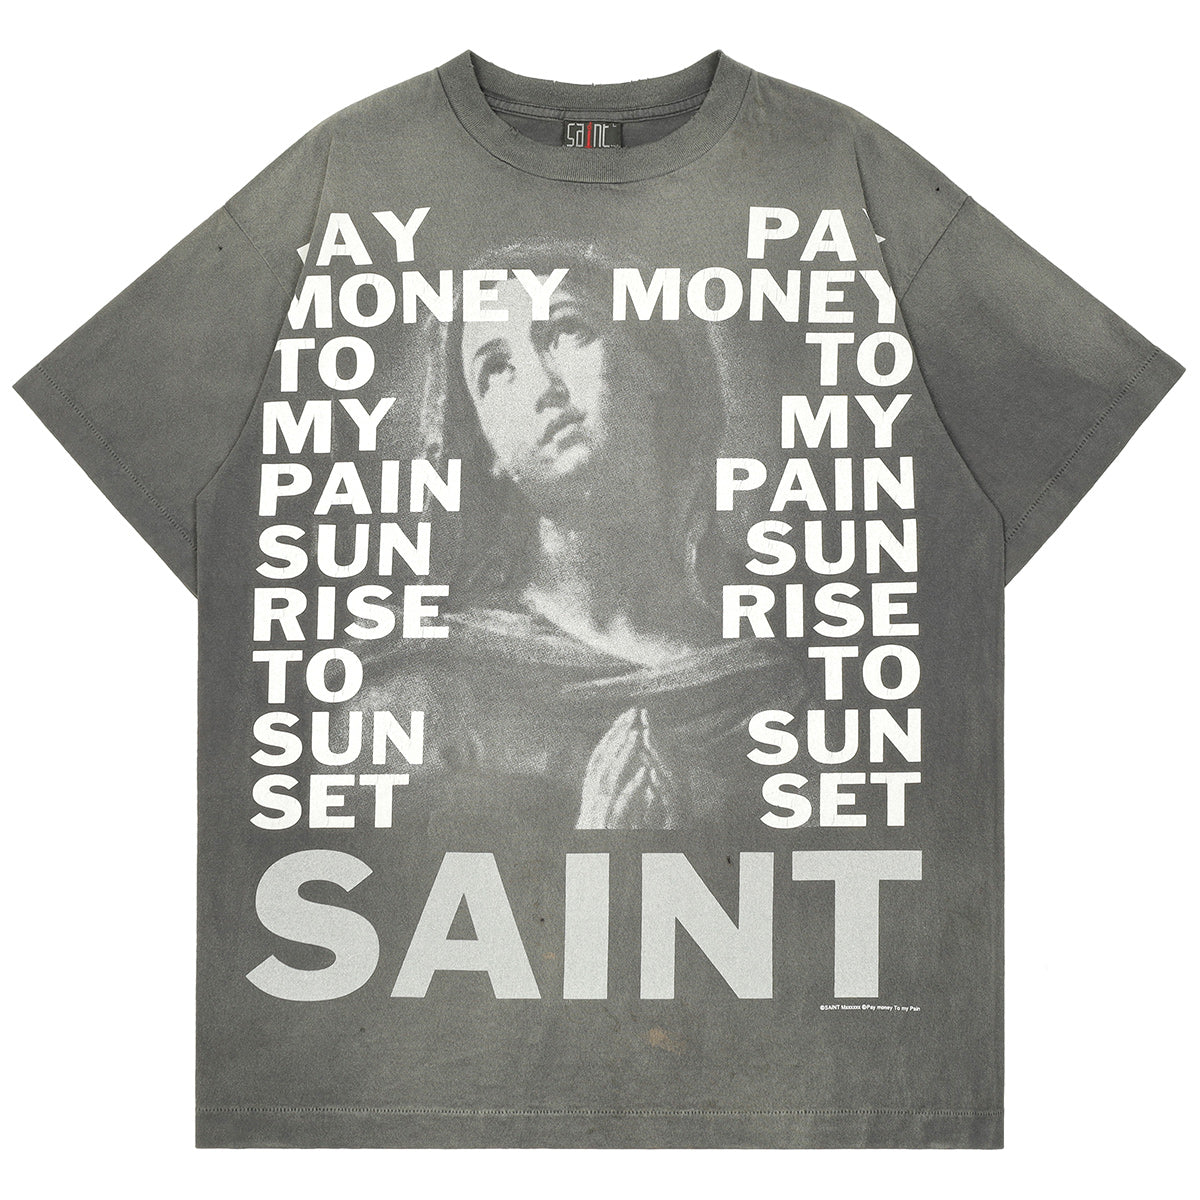 Pay money To my Pain (PTP)×©SAINT M××××××SMC49 STAY REAL S/S TEE